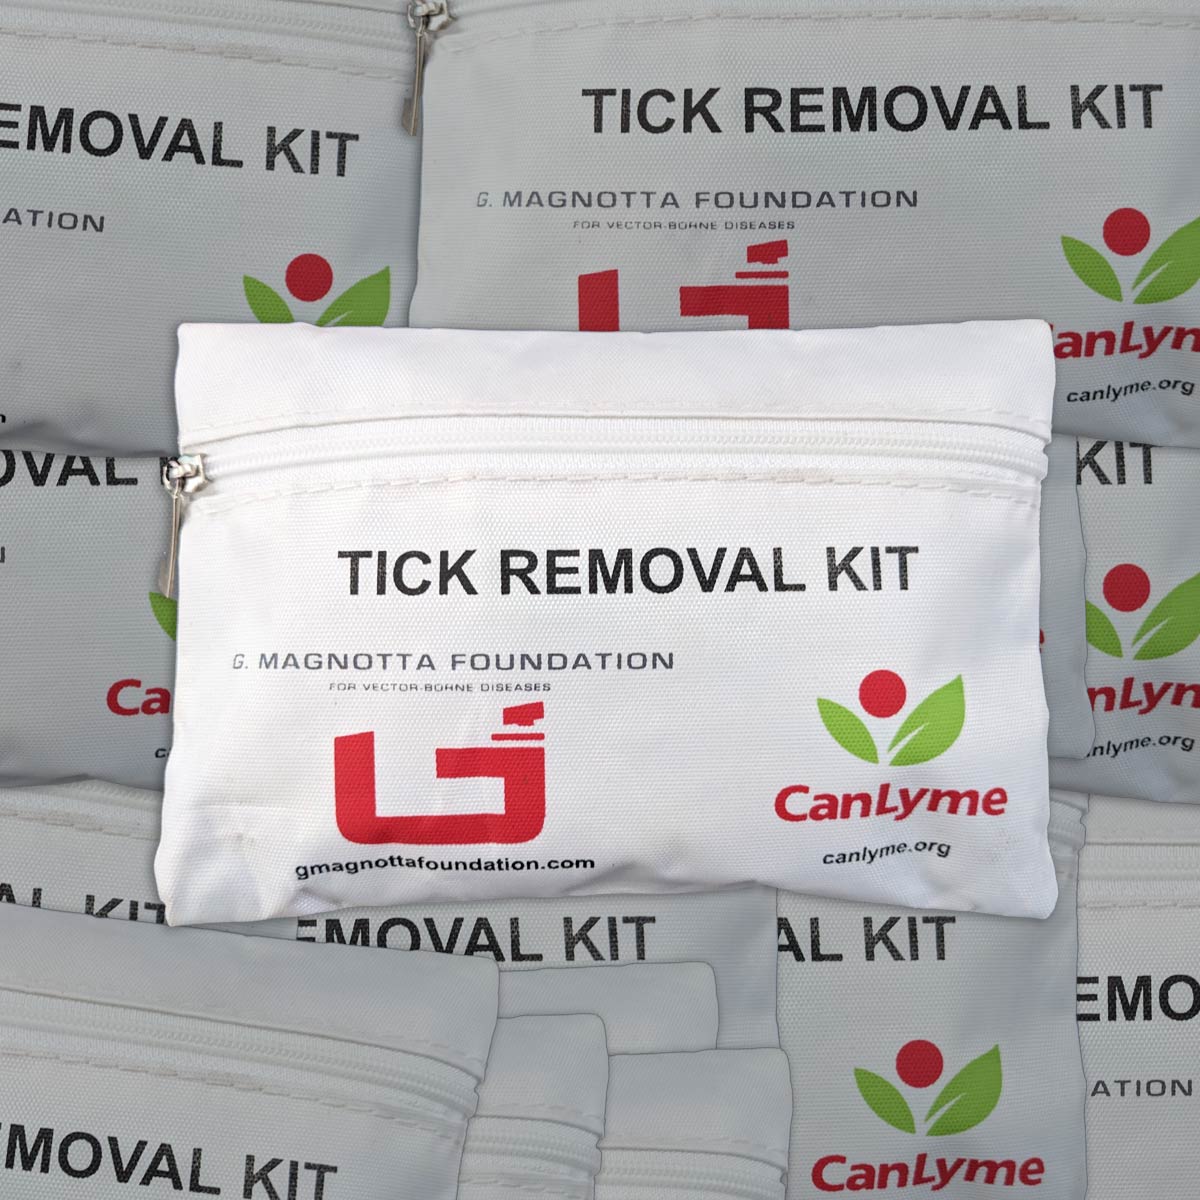 CanLyme Tick Removal Kits, stacked into a box.